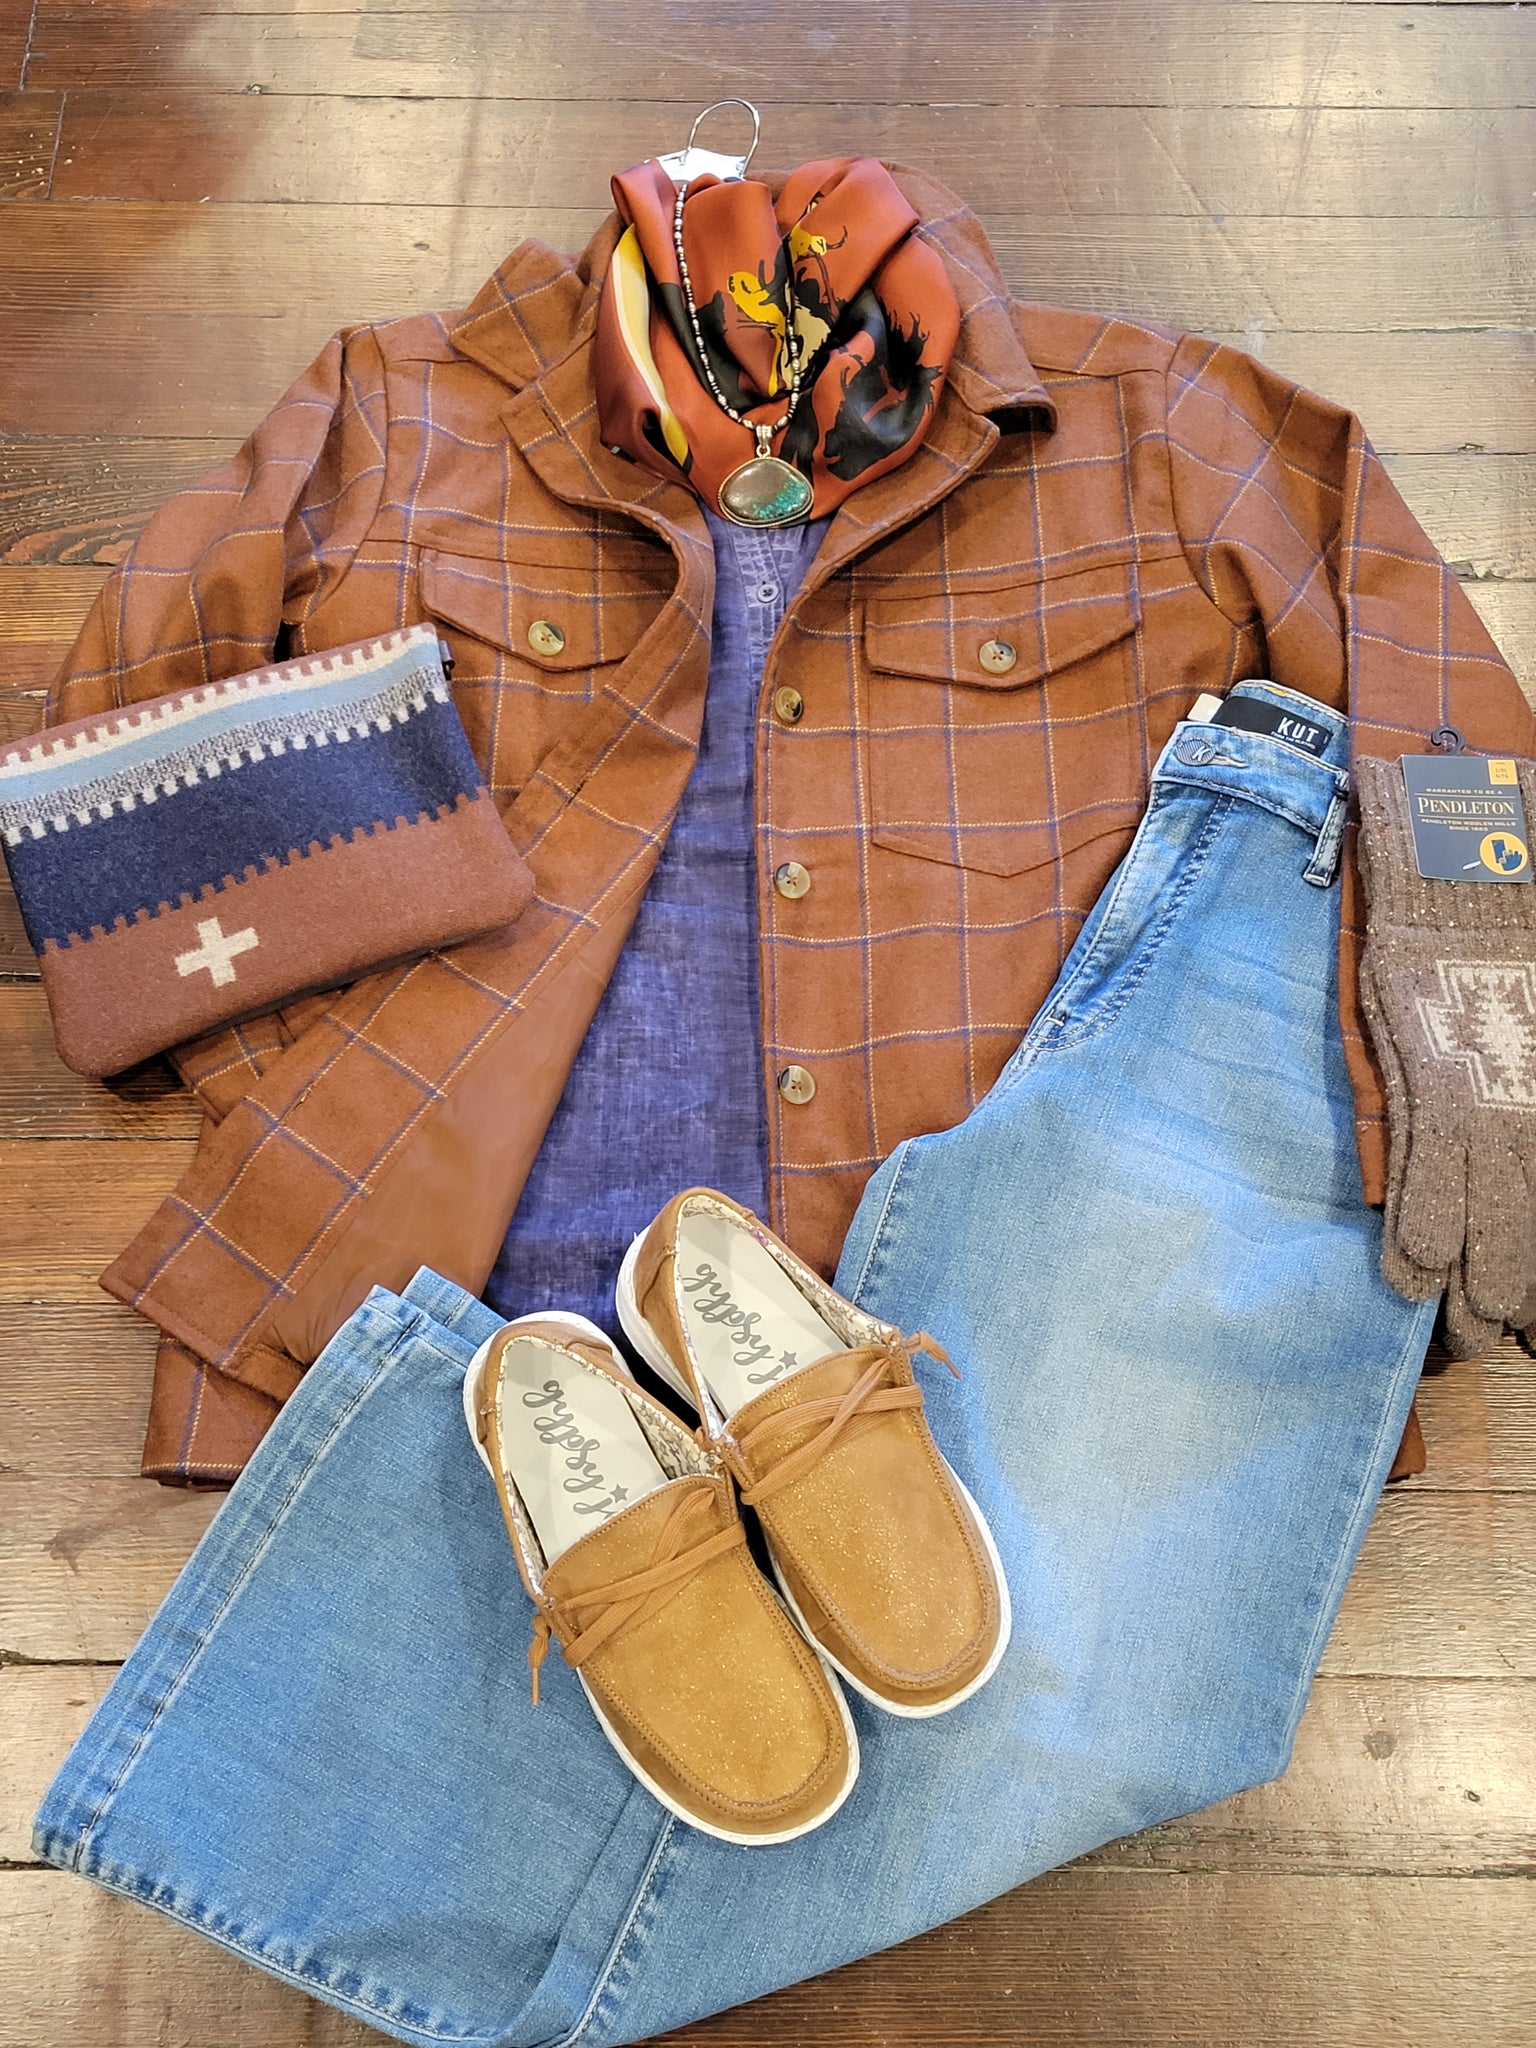 Plaid Shacket fully lined, wool blend, paired with brown shoes, gloves and hand bag. Accessories: Fringe Scarf and Sterling Silver Necklace